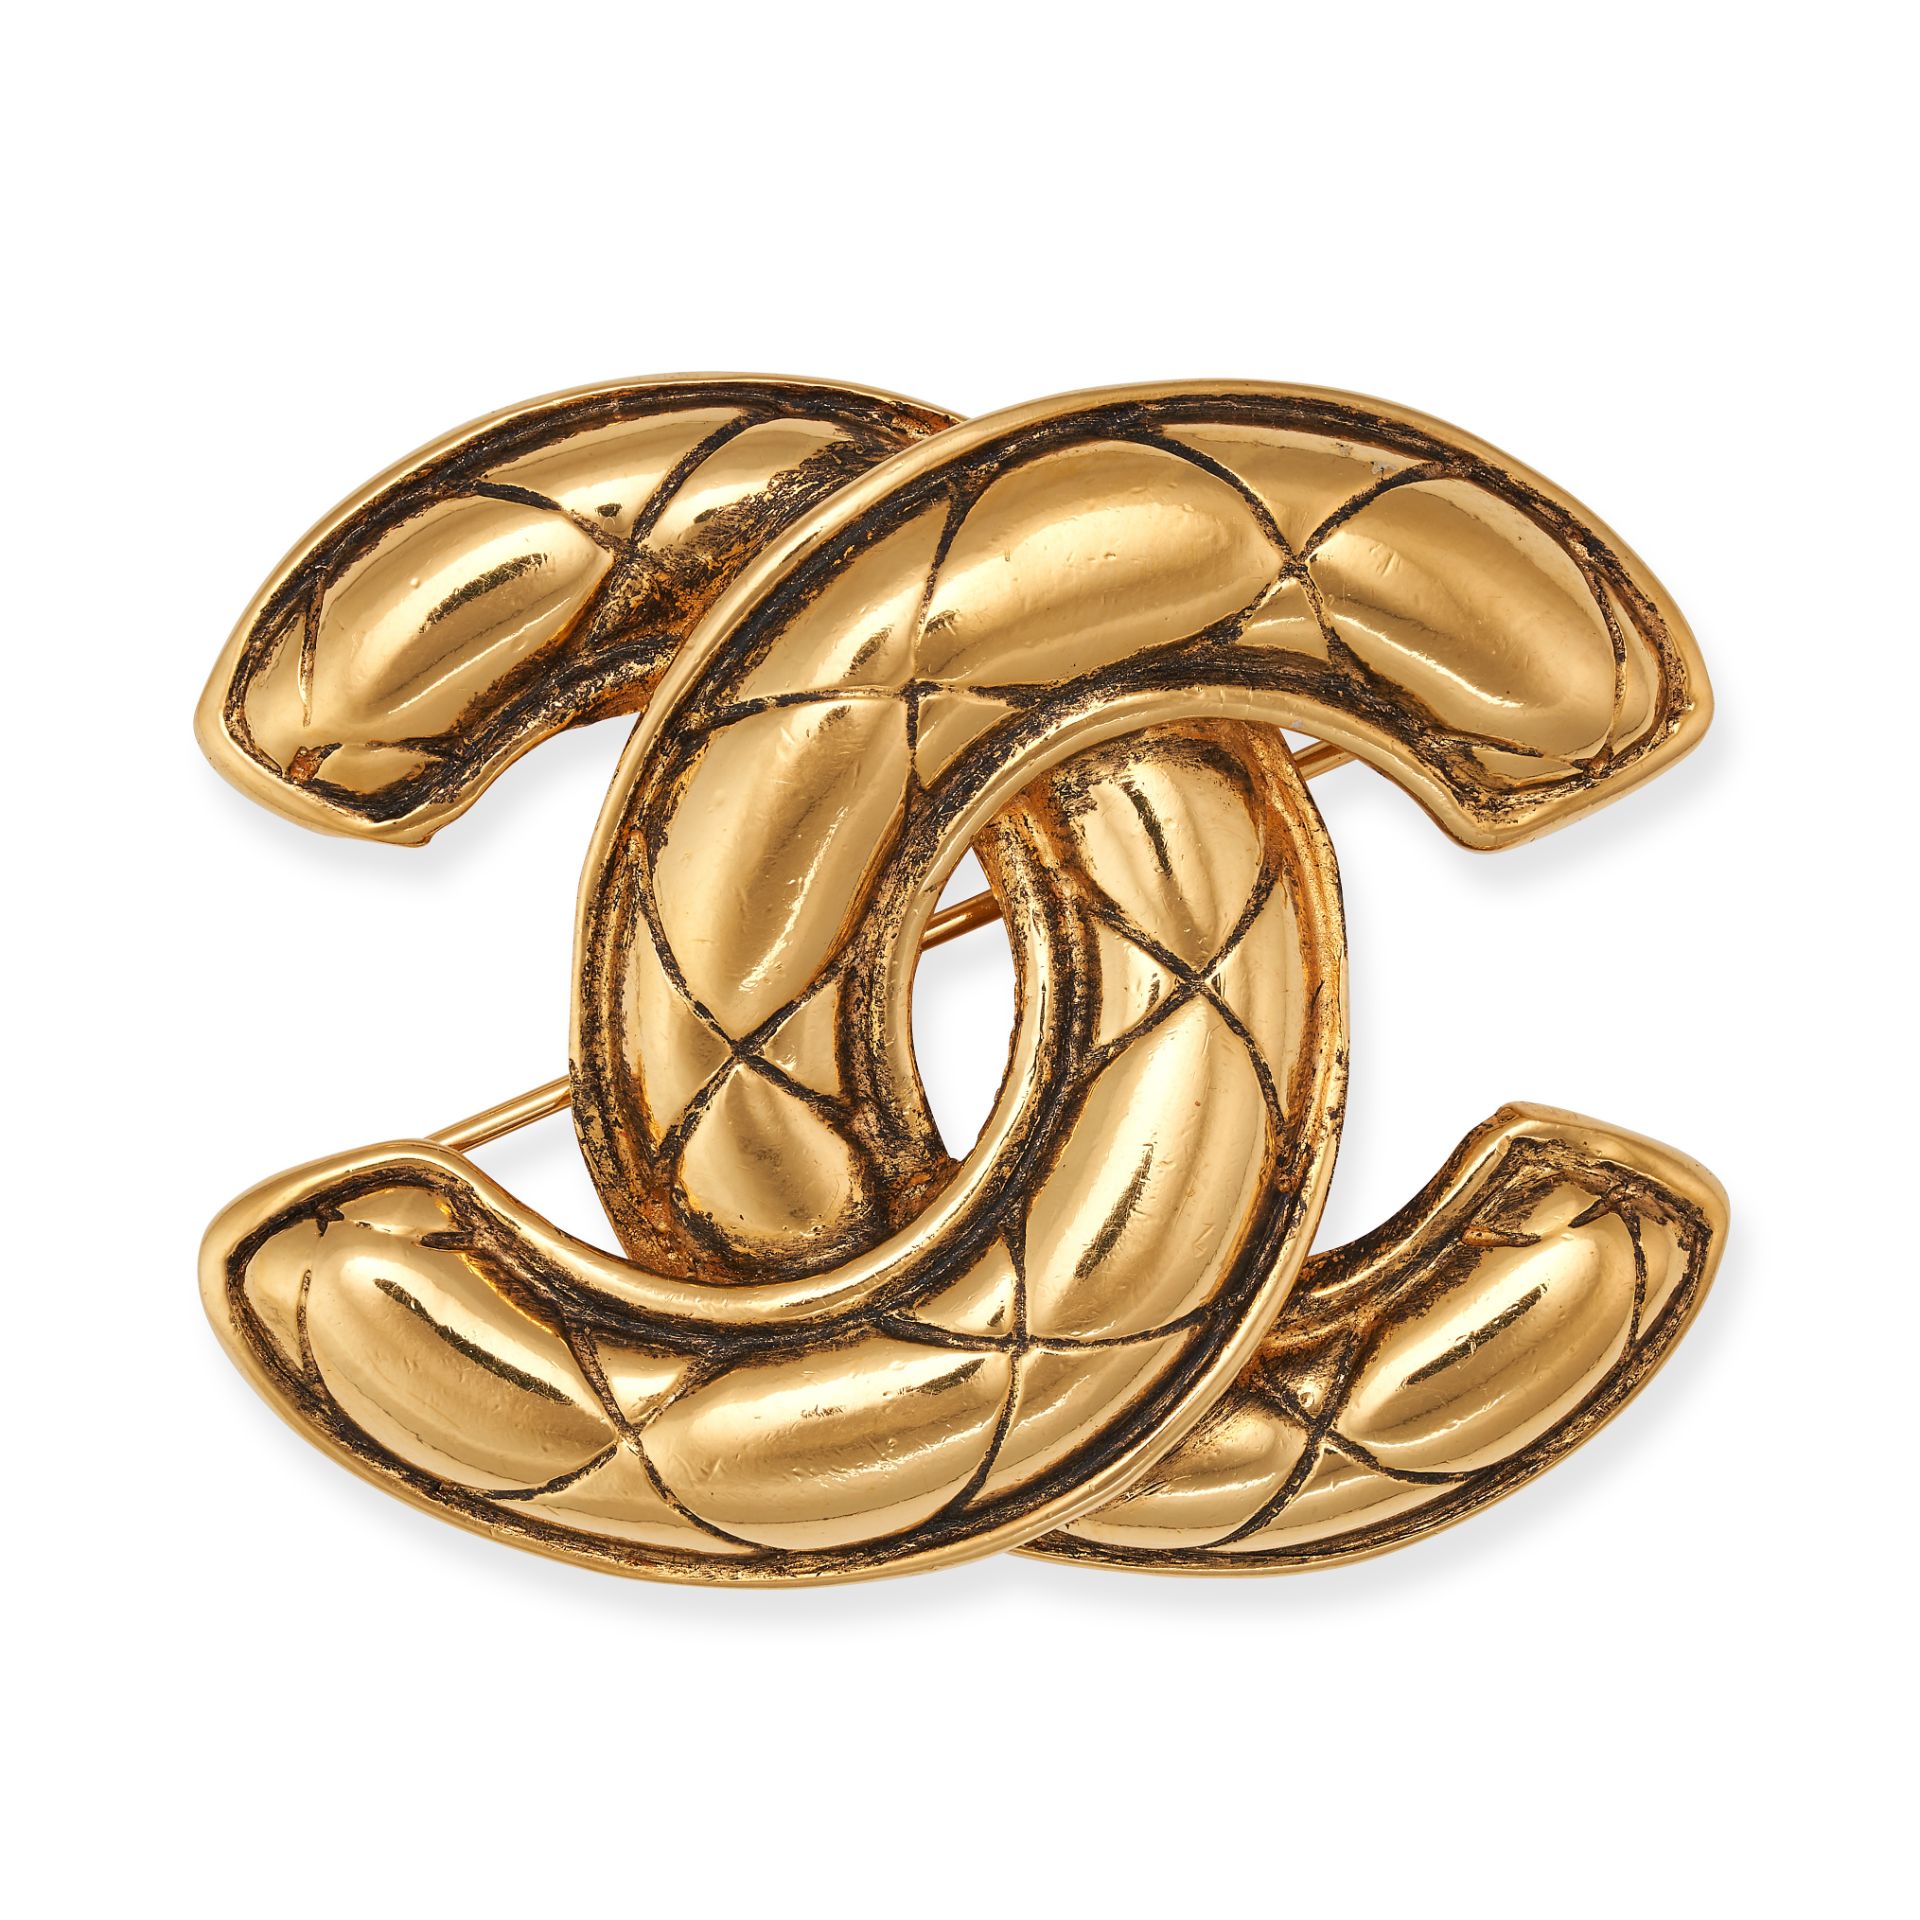 CHANEL, A VINTAGE CC BROOCH plated in 24ct gold, designed as a quilted interlocking 'CC' logo, si...